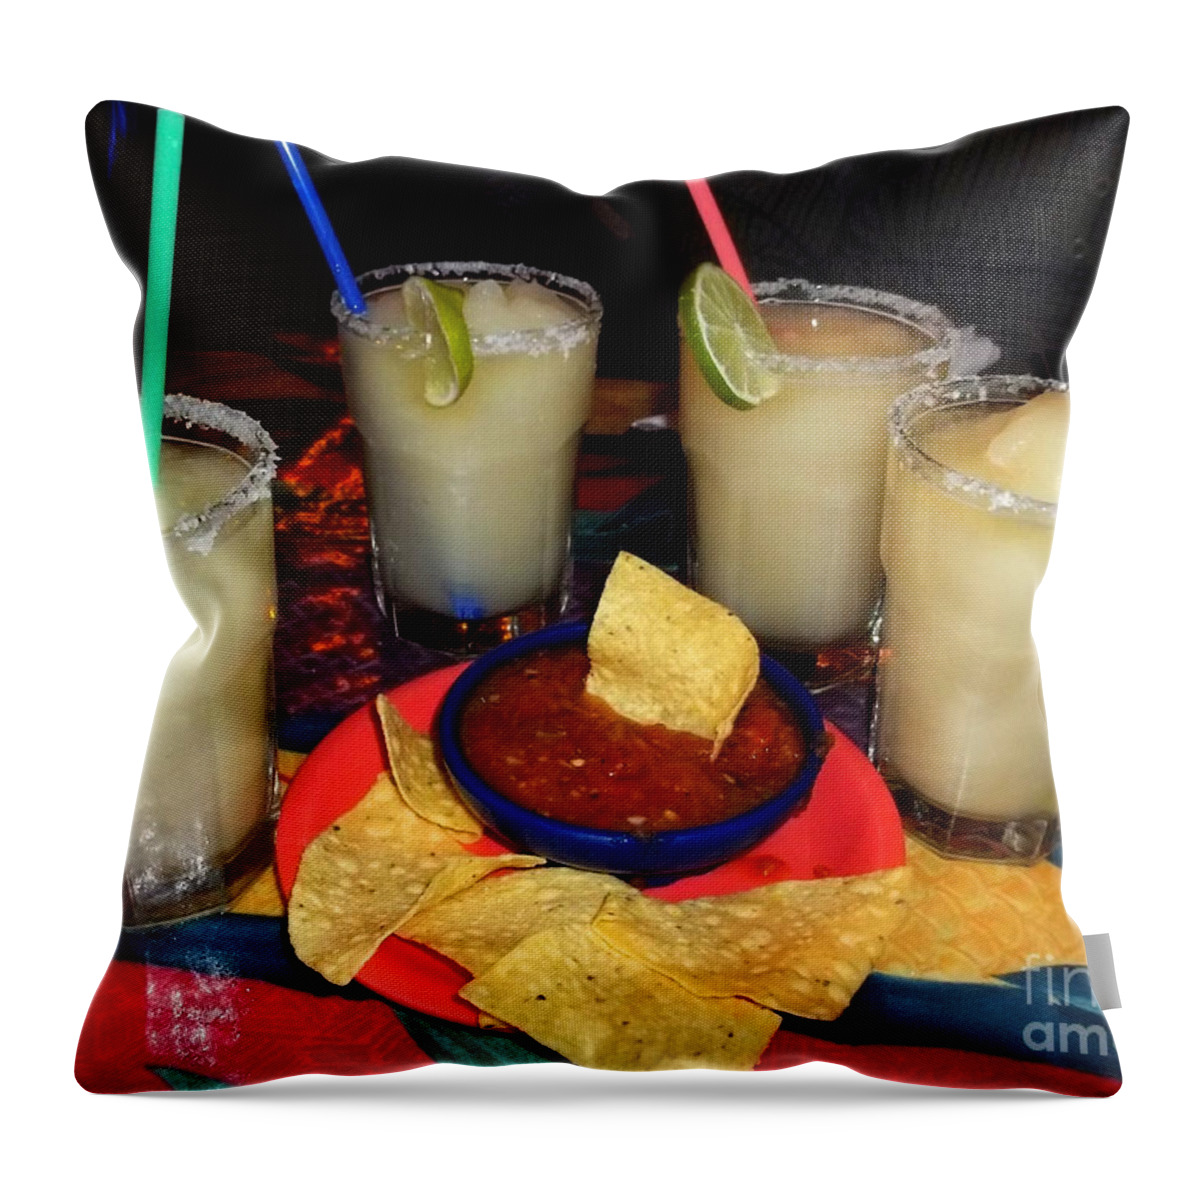 Margaritas Throw Pillow featuring the photograph Margarita Time by Nancy Mueller